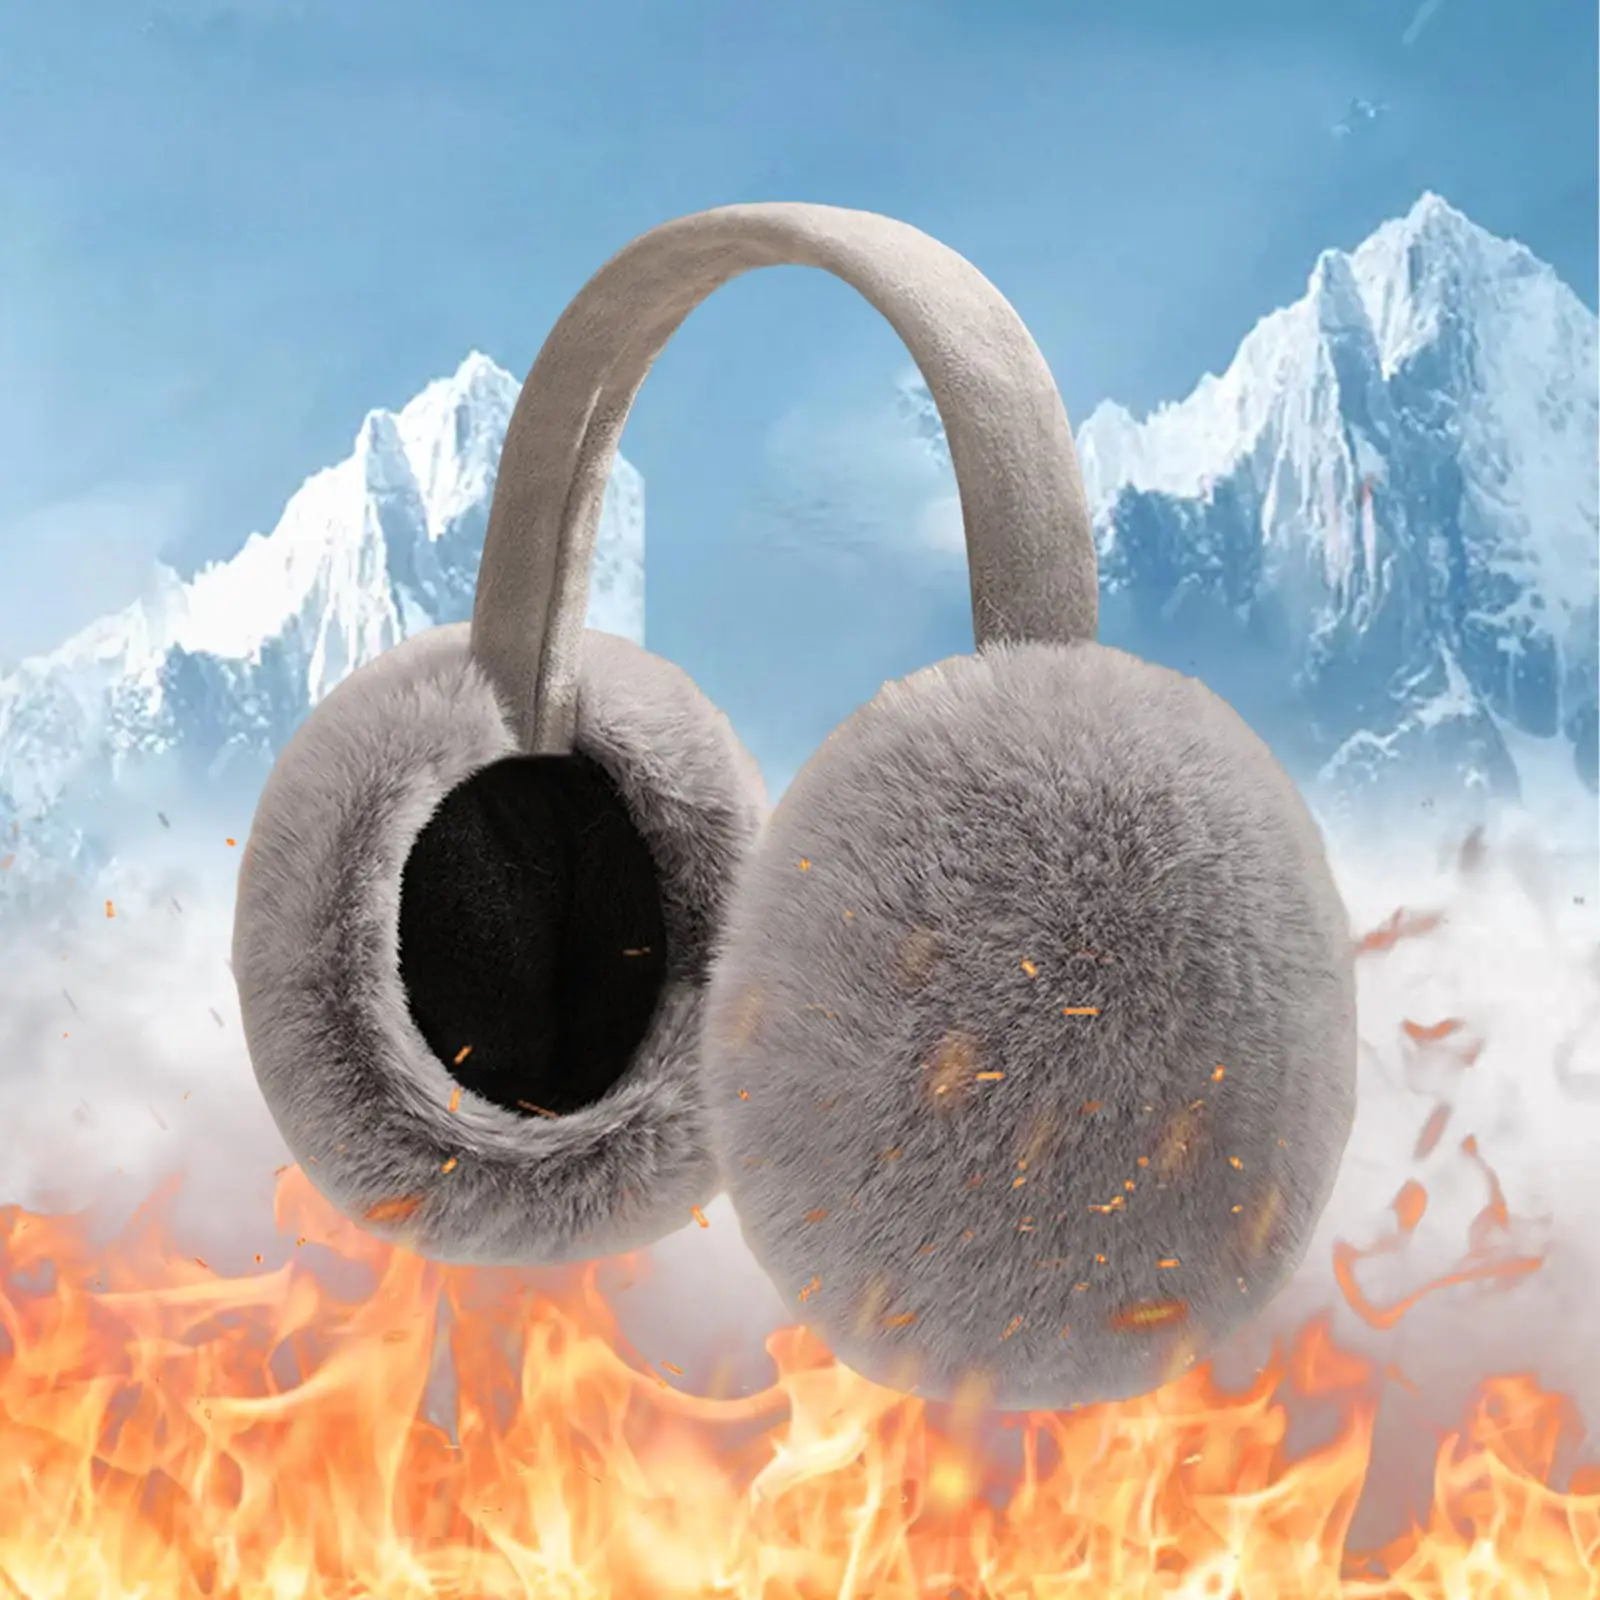 Ear Muffs Earmuffs Ear Flaps Thermal Ear Warmer for Outdoor Cold Weather Ski